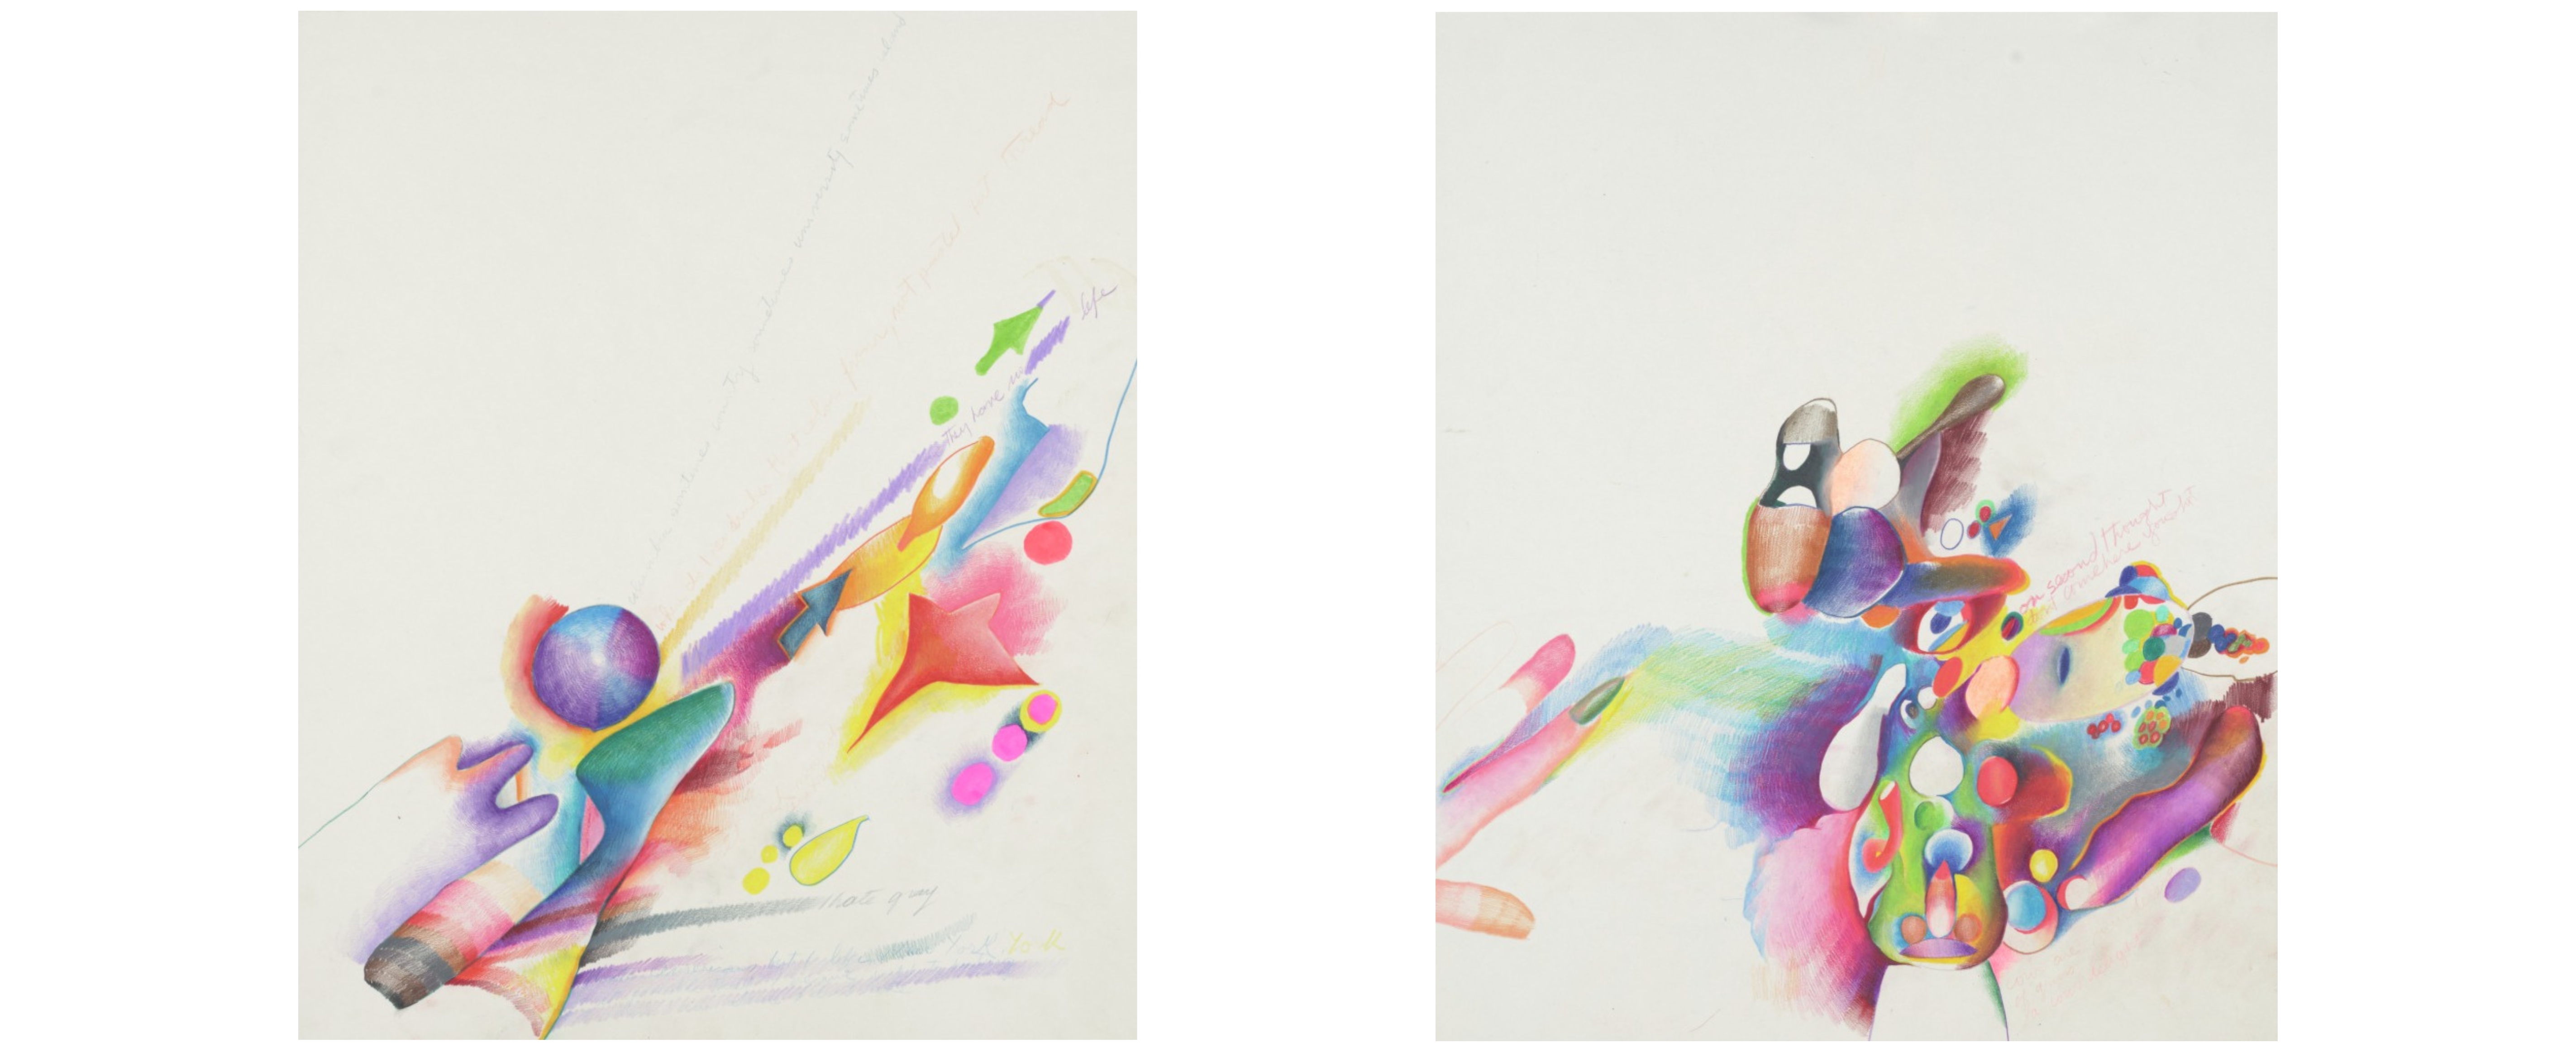 Two colorful sketches by Marisol next to one another with geometric and abstract shapes at the bottom 1/3 of the paper